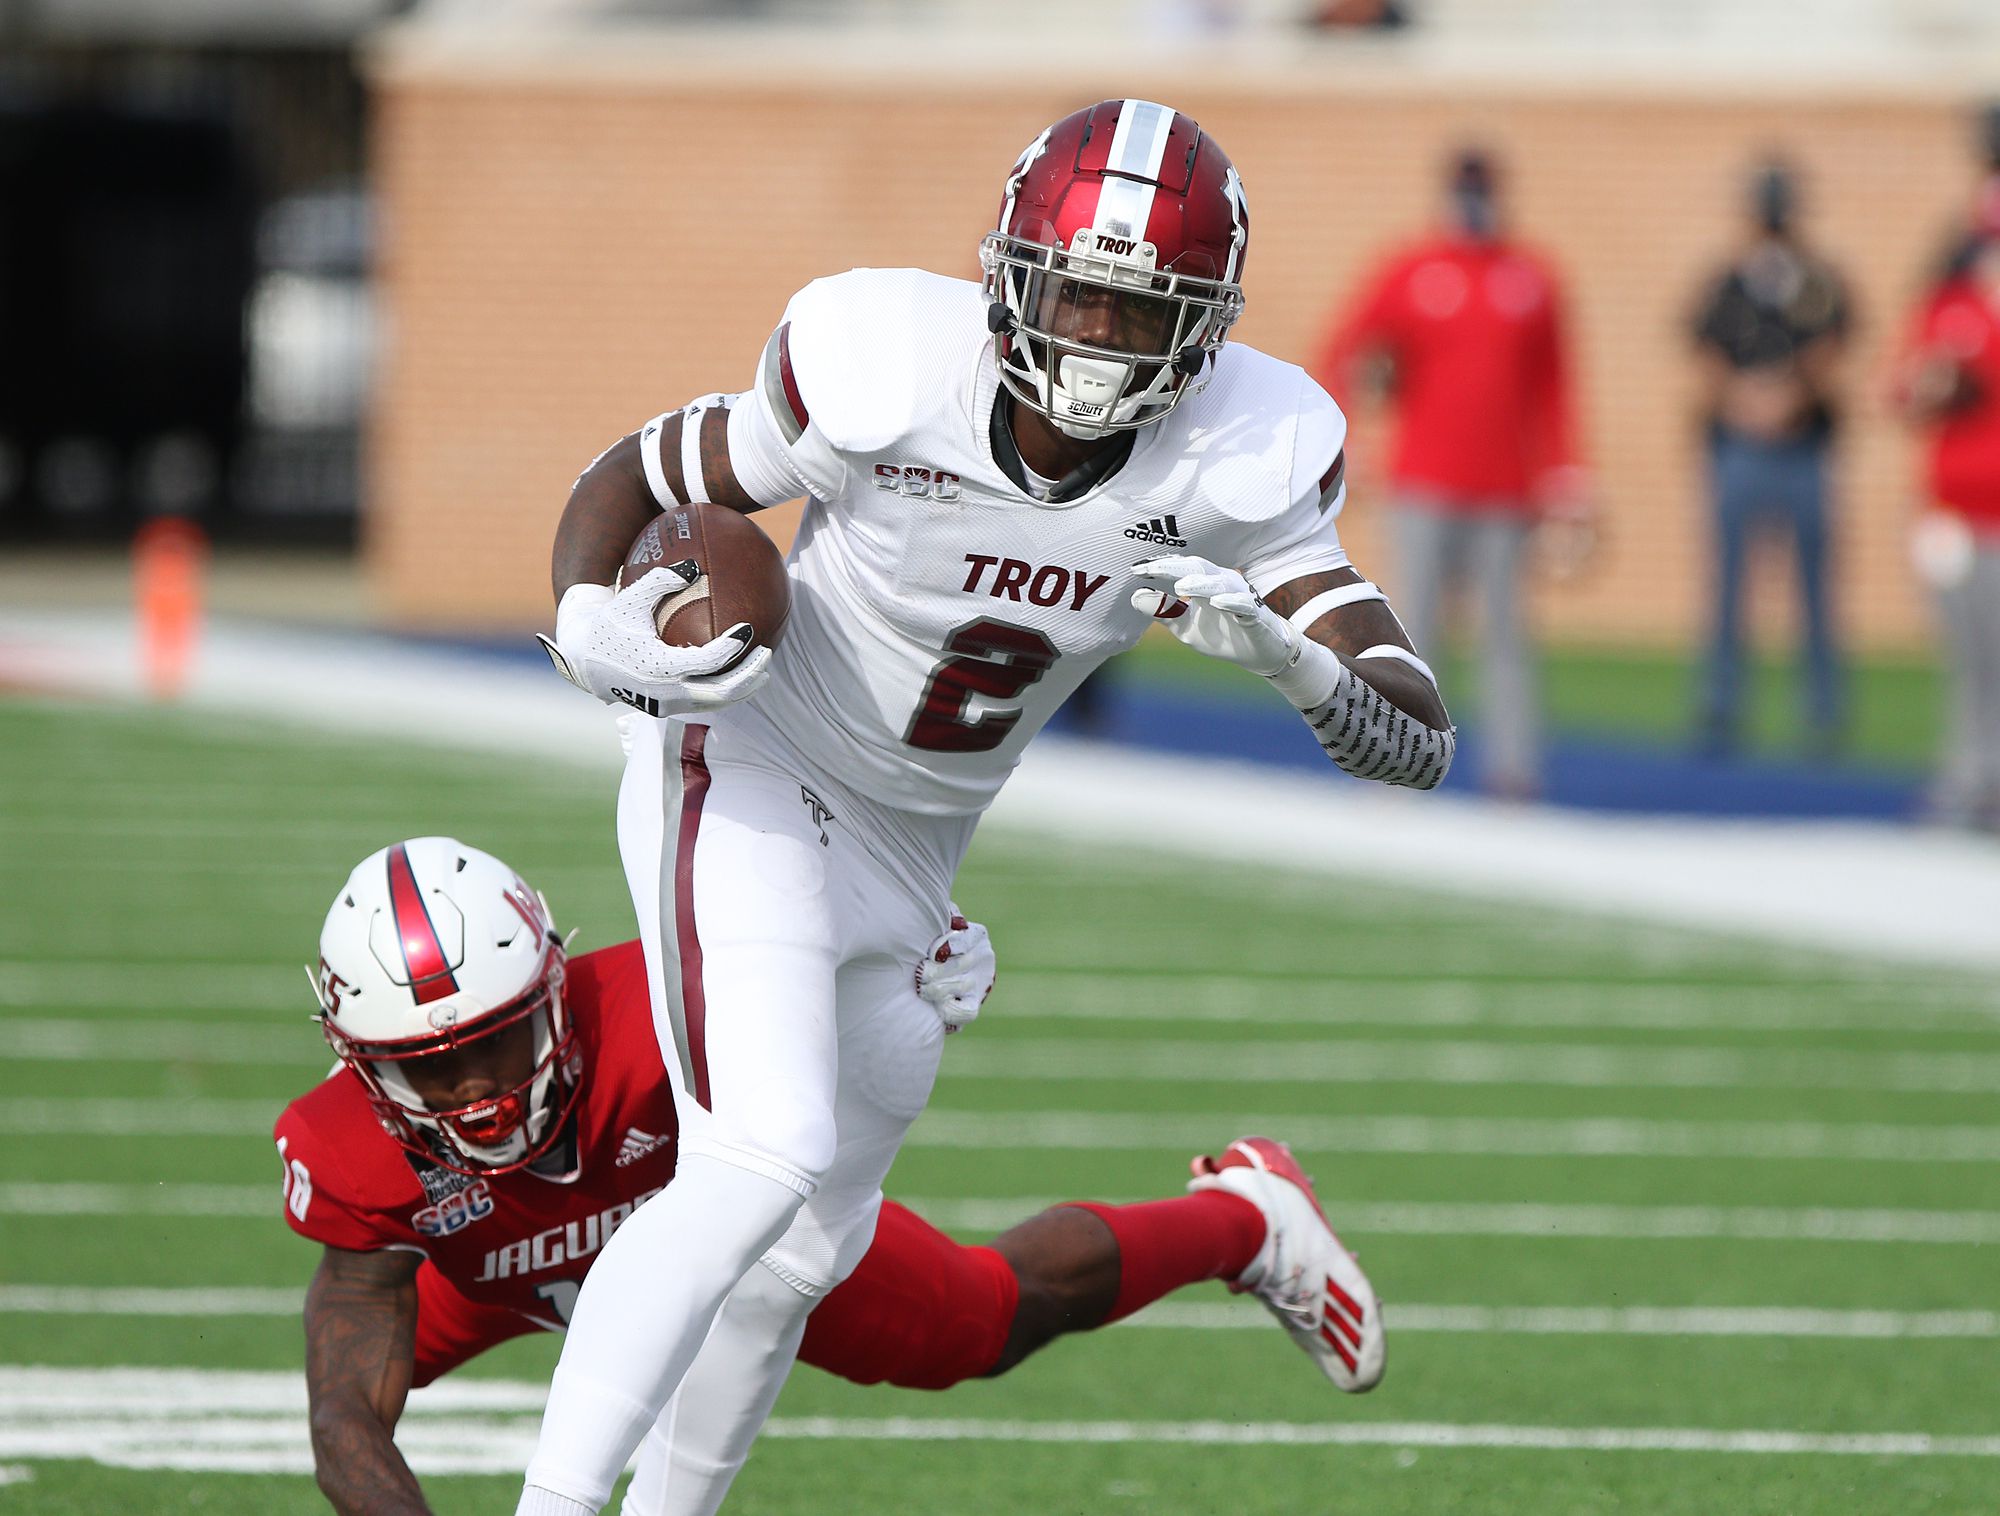 Troy wide receiver Reginald Todd was arrested for first-degree hindering prosecution and second-degree possession of marijuana.